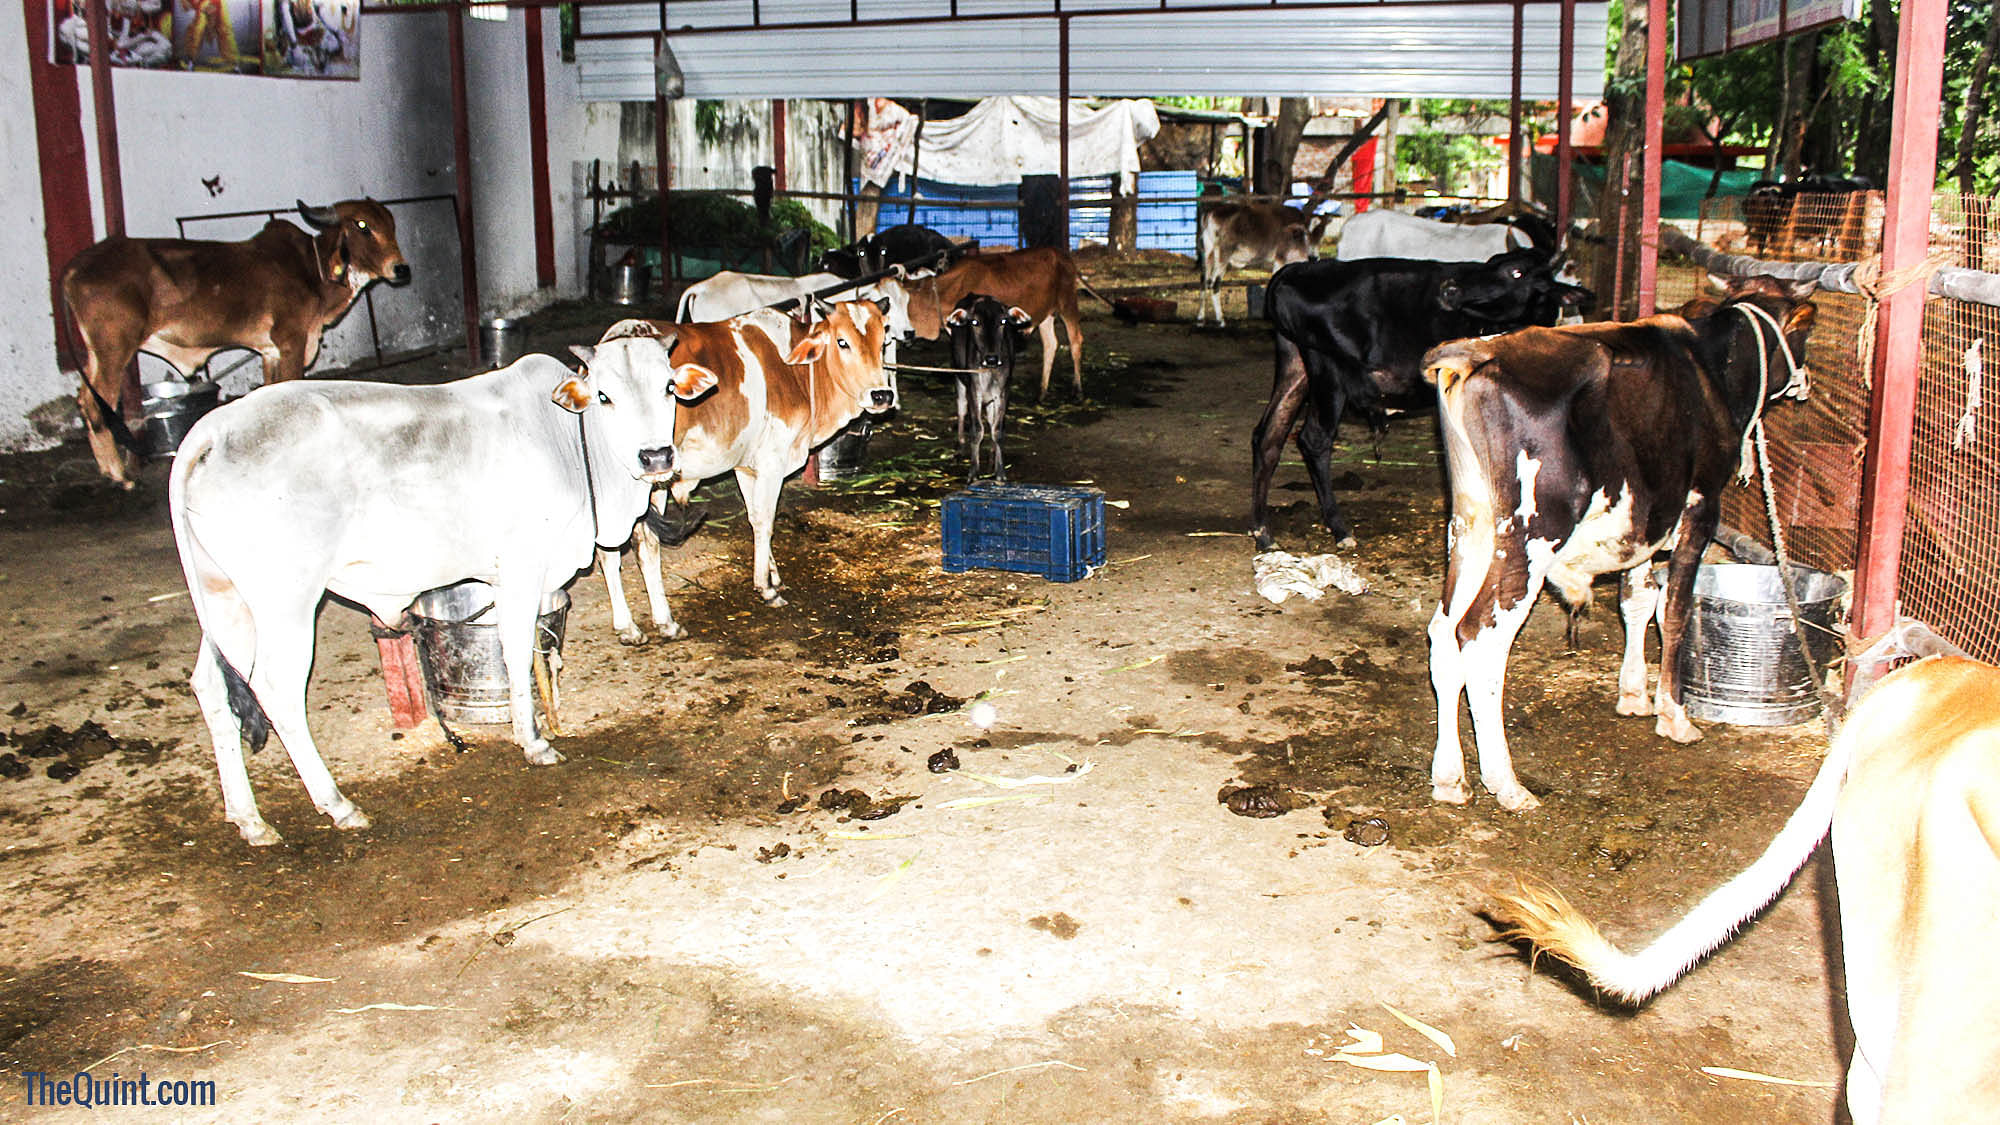 While BJP doesn’t shy away from politicising the cow, apathy is leading to shutdown of cow sheds in Madhya Pradesh.&nbsp;